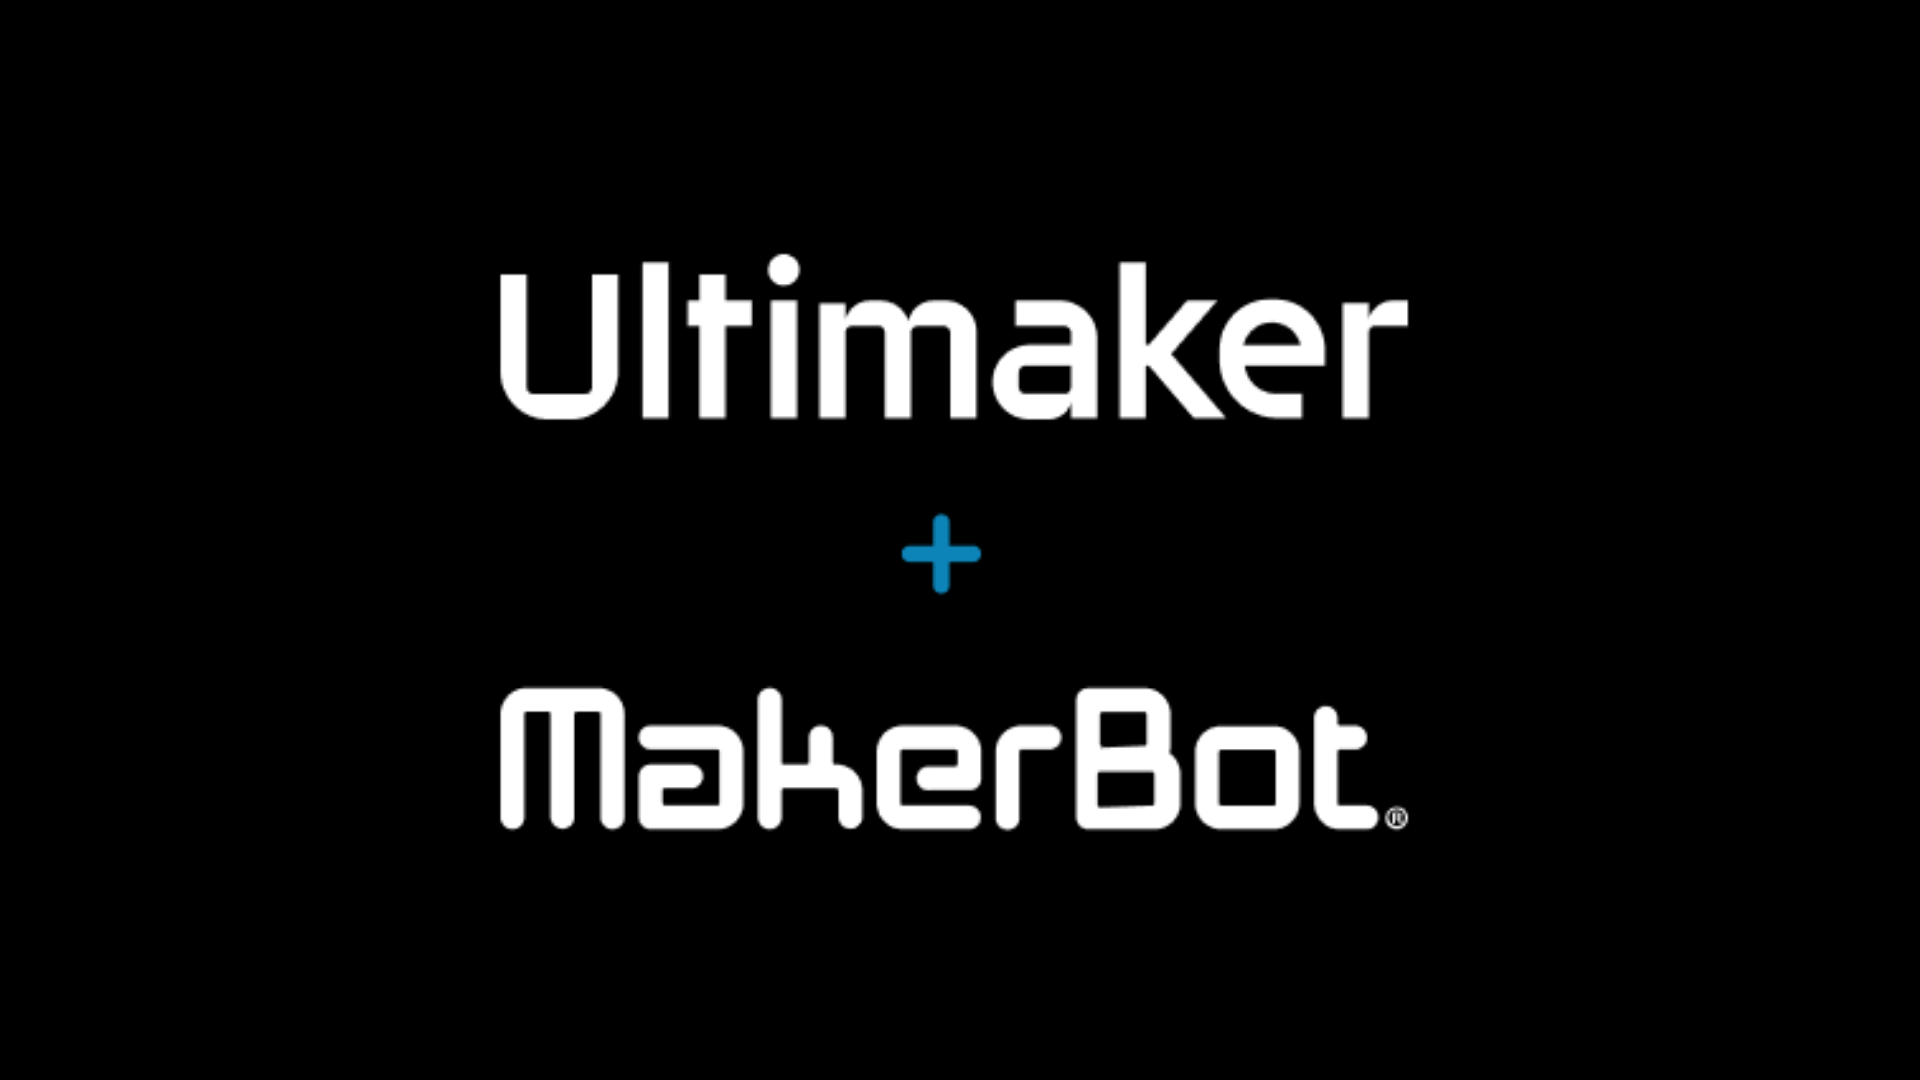 Stratasys announced it closed the merger of subsidiary MakerBot with Ultimaker to form a new entity under the name Ultimaker, effective August 31, 2022